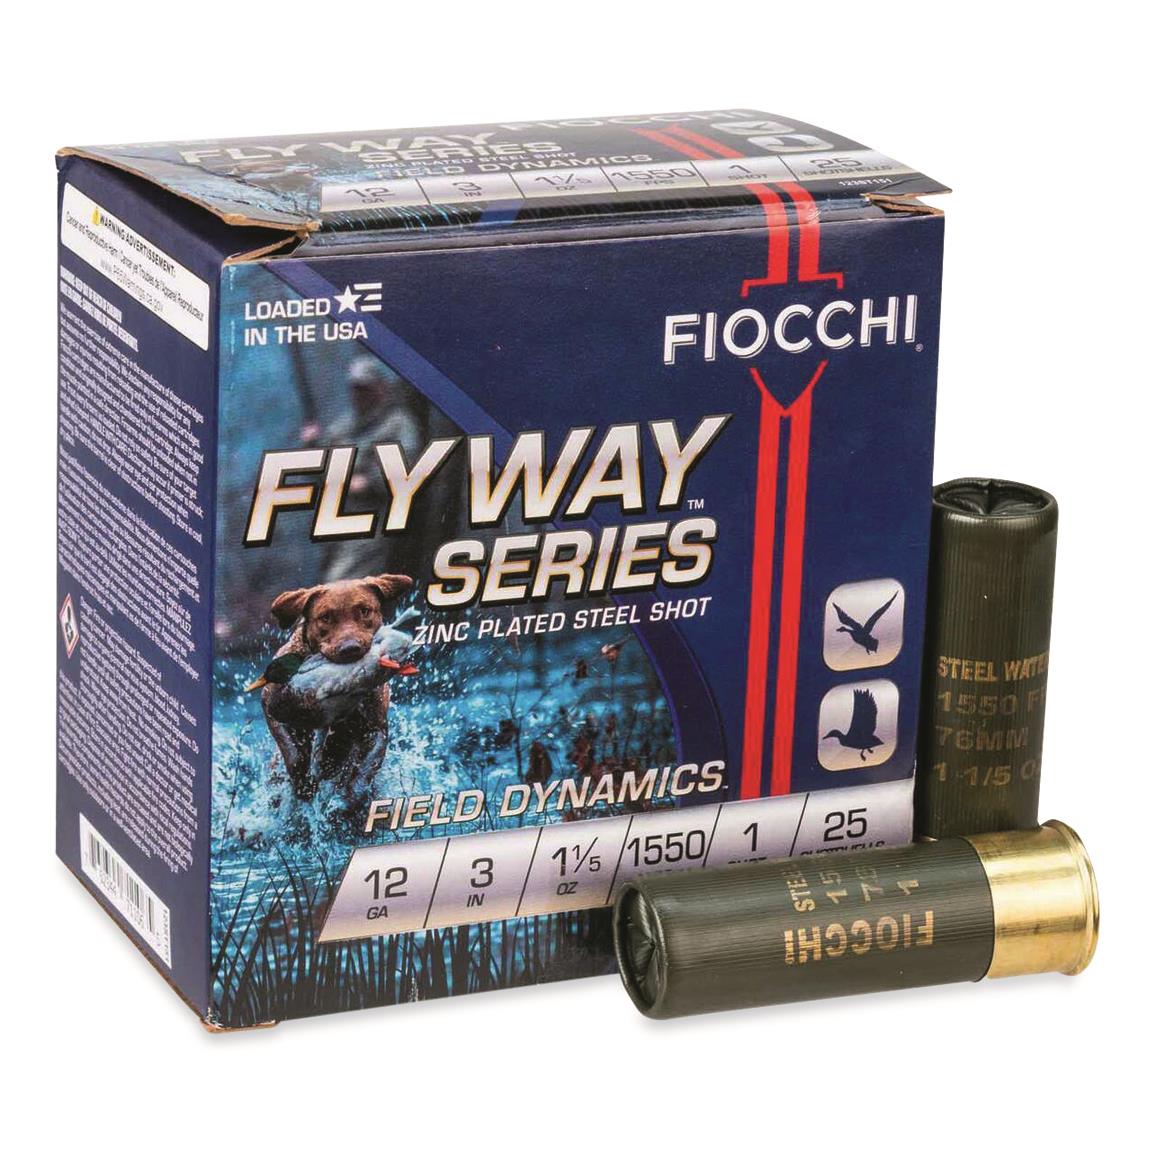 Fiocchi Flyway Plated Steel, 12 Gauge, 3", 1 1/5 oz., 25 Rounds